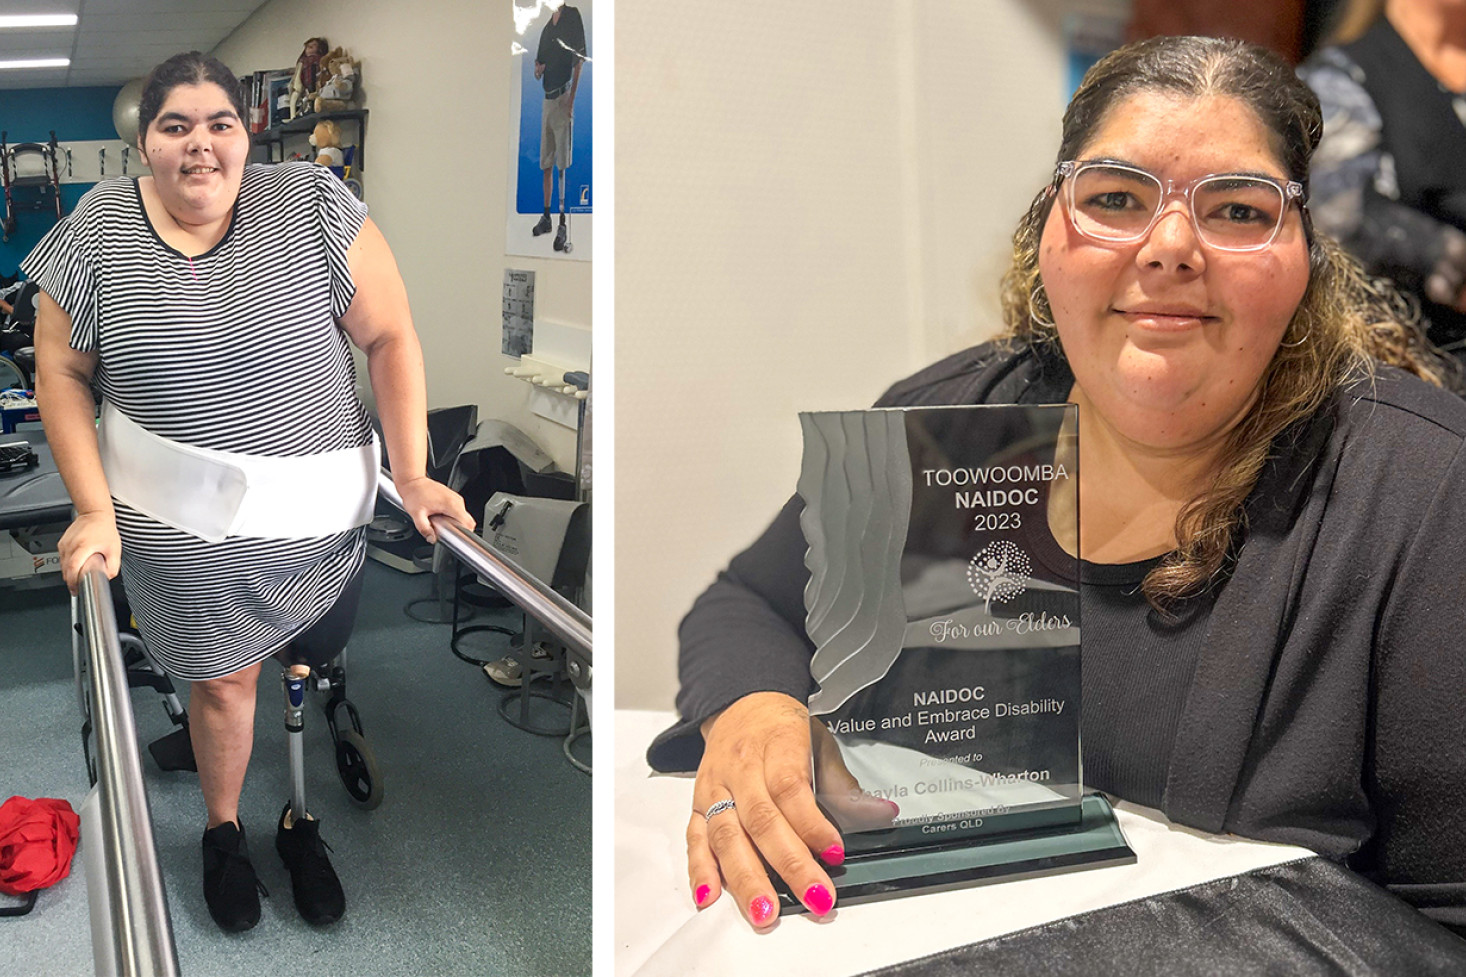 Left: Shayla Collins-Wharton using her prosthetic leg. Right: Shayla with her 2023 NAIDOC Award.